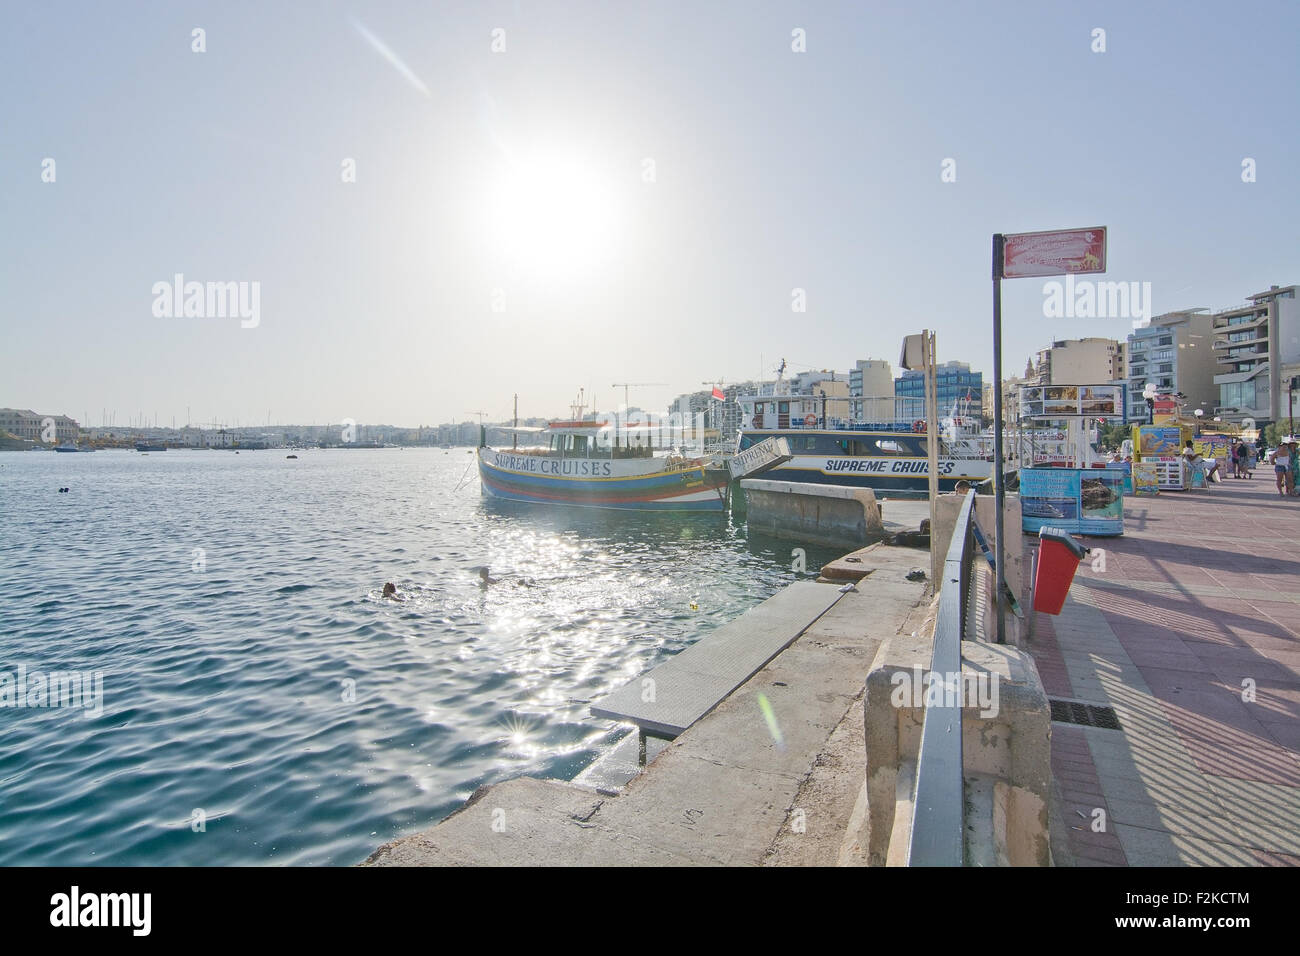 Tour boats in the Sliema Ferries terminal on a sunny afternoon in September. Stock Photo